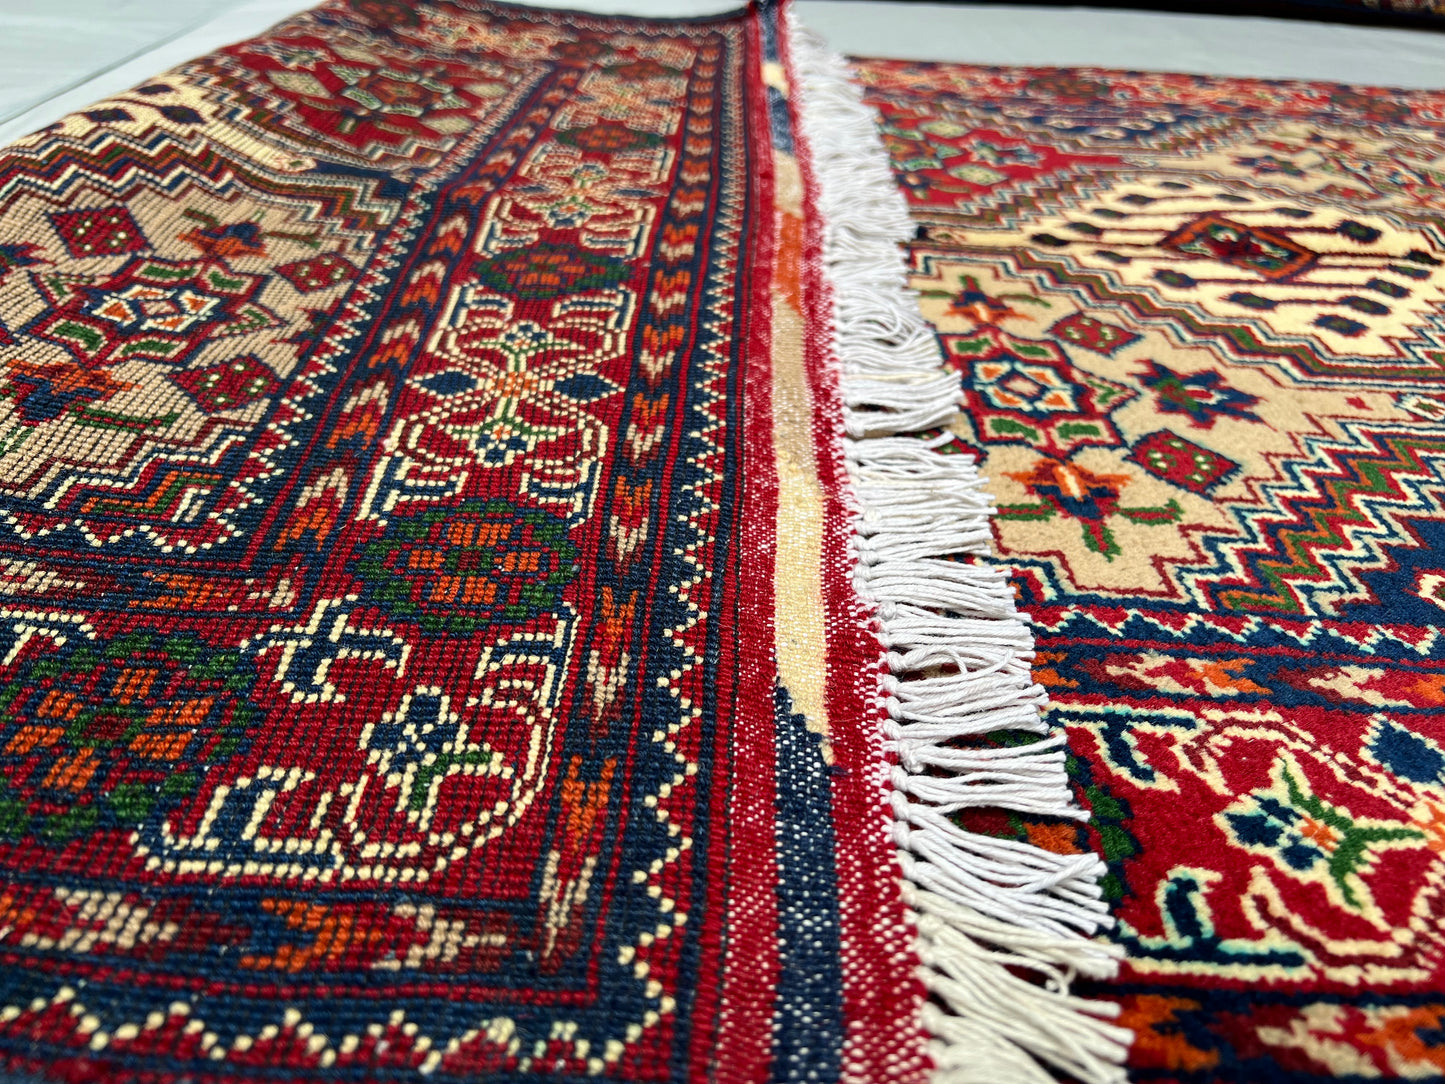 Hand Knitted/ Knotted Hallway Runner Yousuf Bayi Merino 7ftx3.1ft (YB-RU-7X3-DB/R/Y-N) (Mazar-e-Sharif) - Kabul Rugs